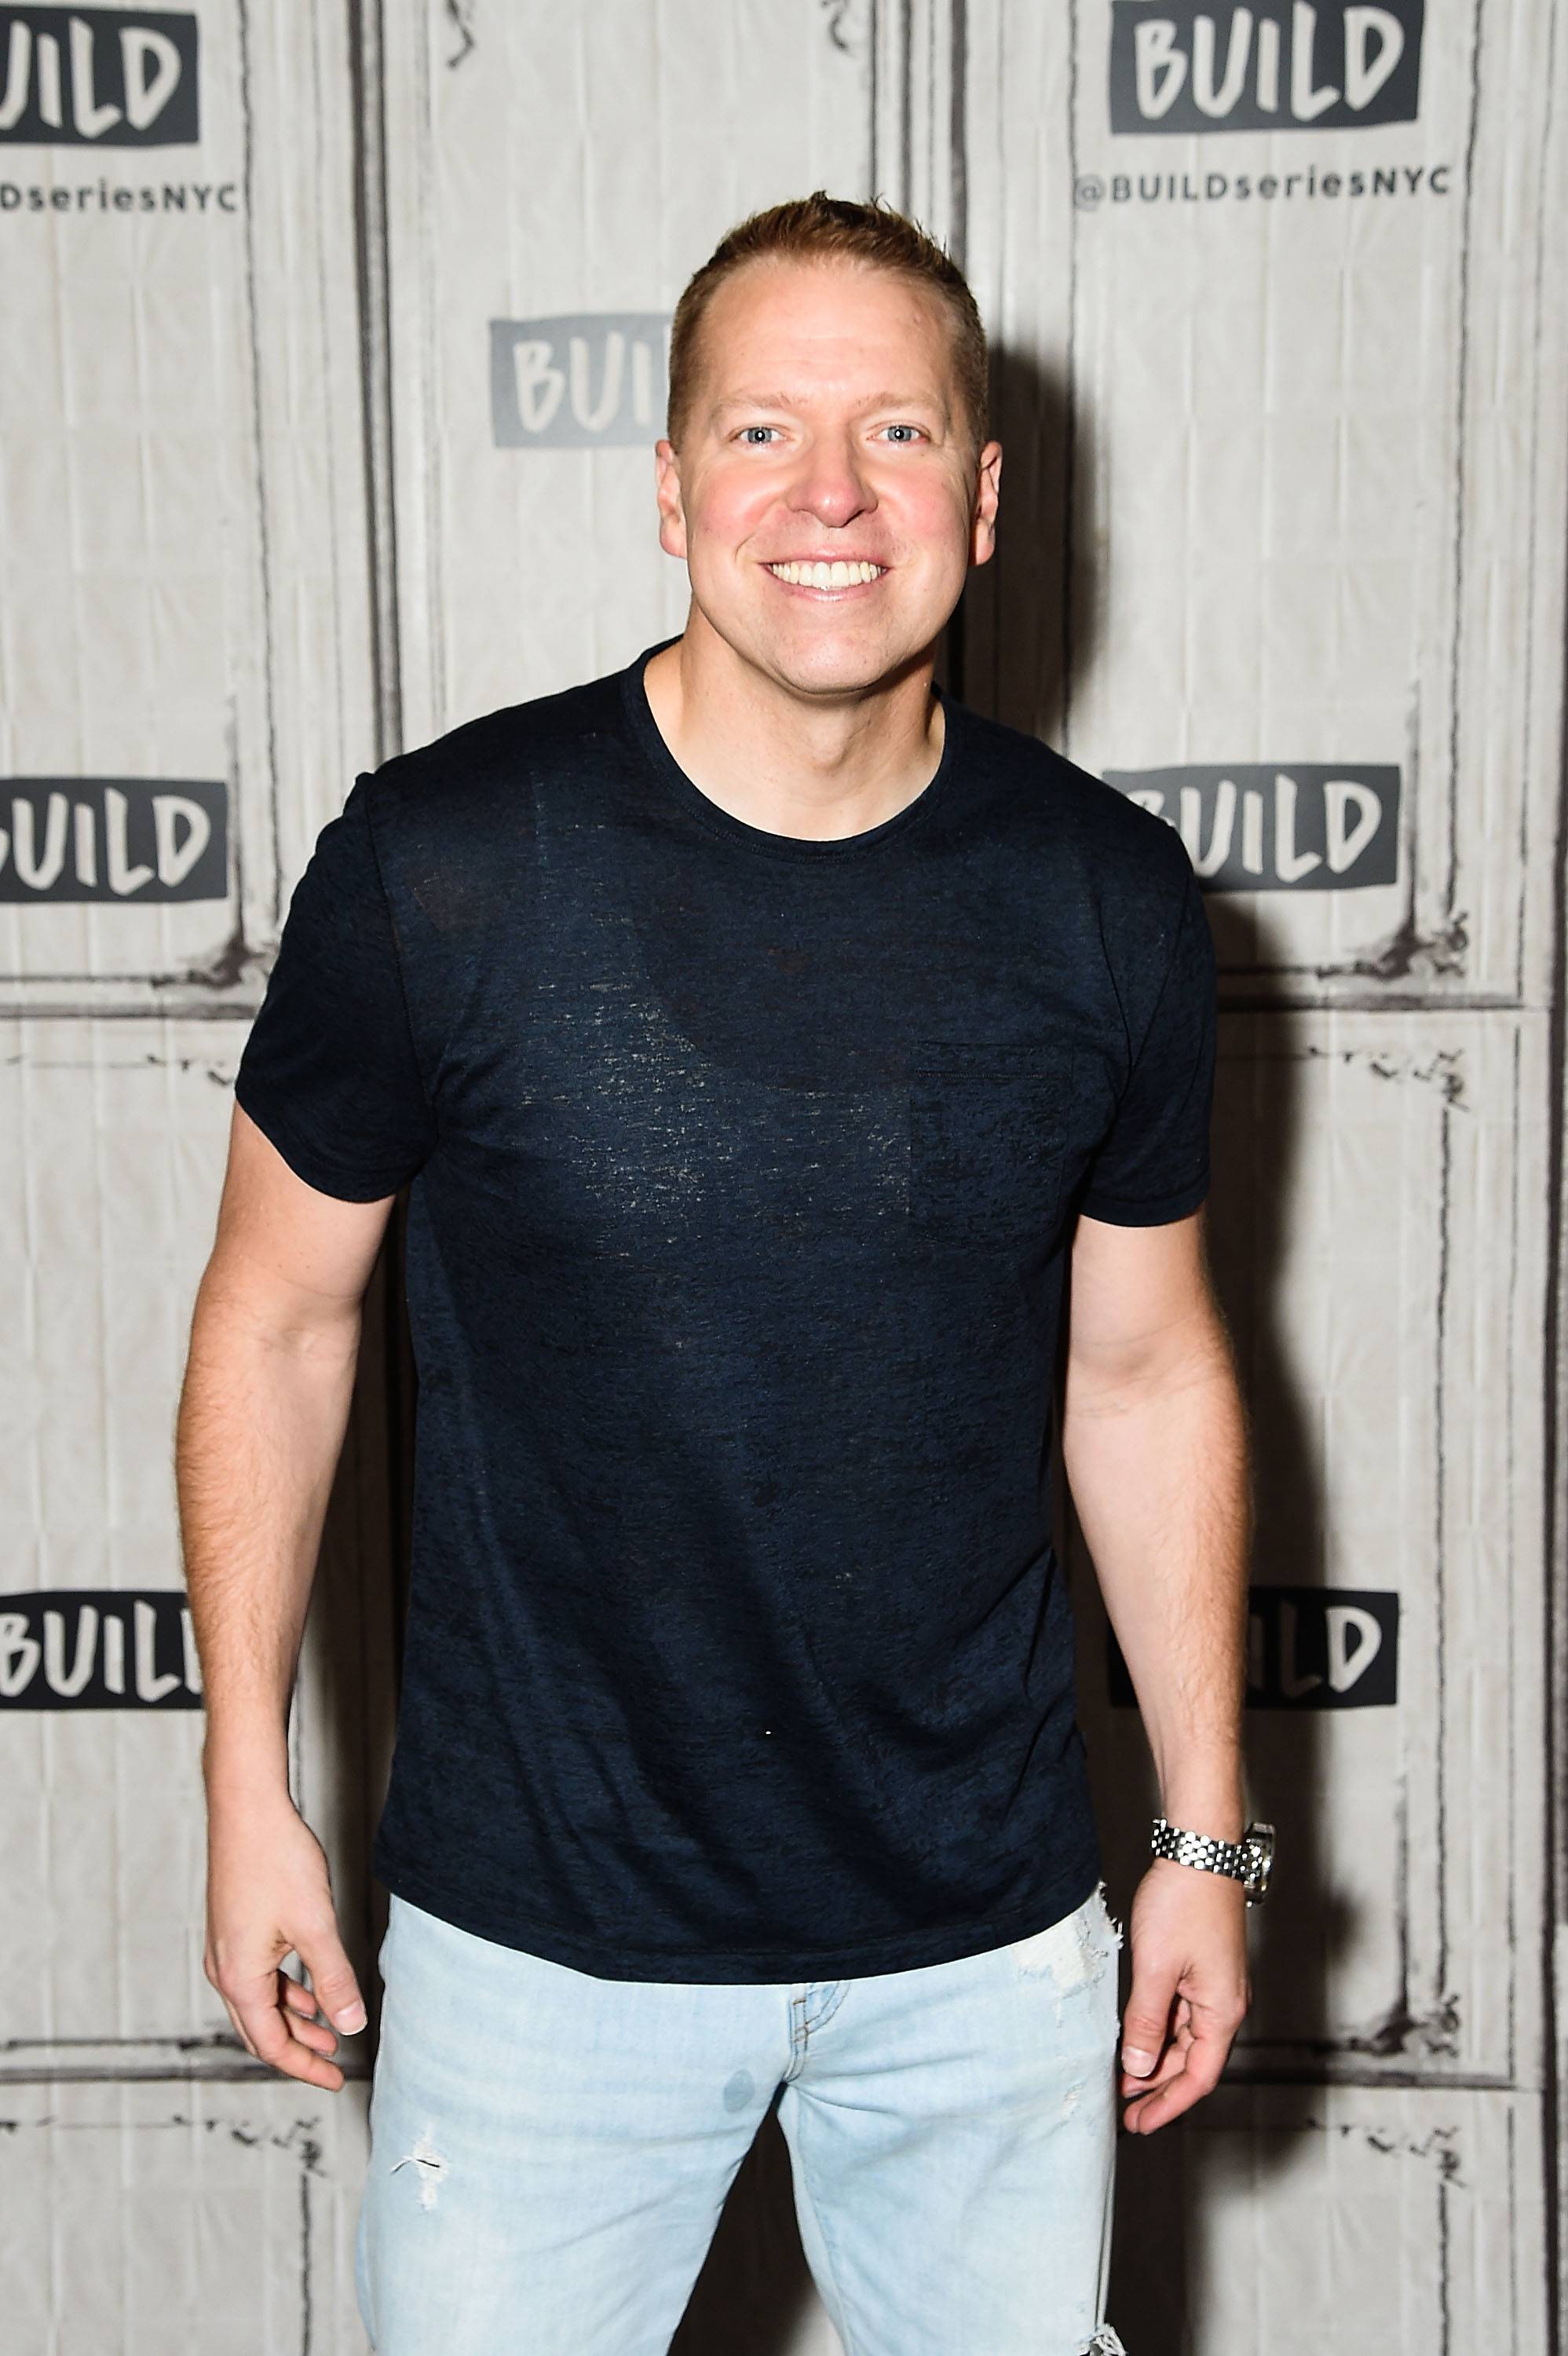 NEW YORK, NY - SEPTEMBER 21:  Comedian and actor Gary Owen visits the Build Series to discuss his comedy special "Gary Owen: I Got My Associates" at Build Studio on September 21, 2017 in New York City.  (Photo by Nicholas Hunt/Getty Images)